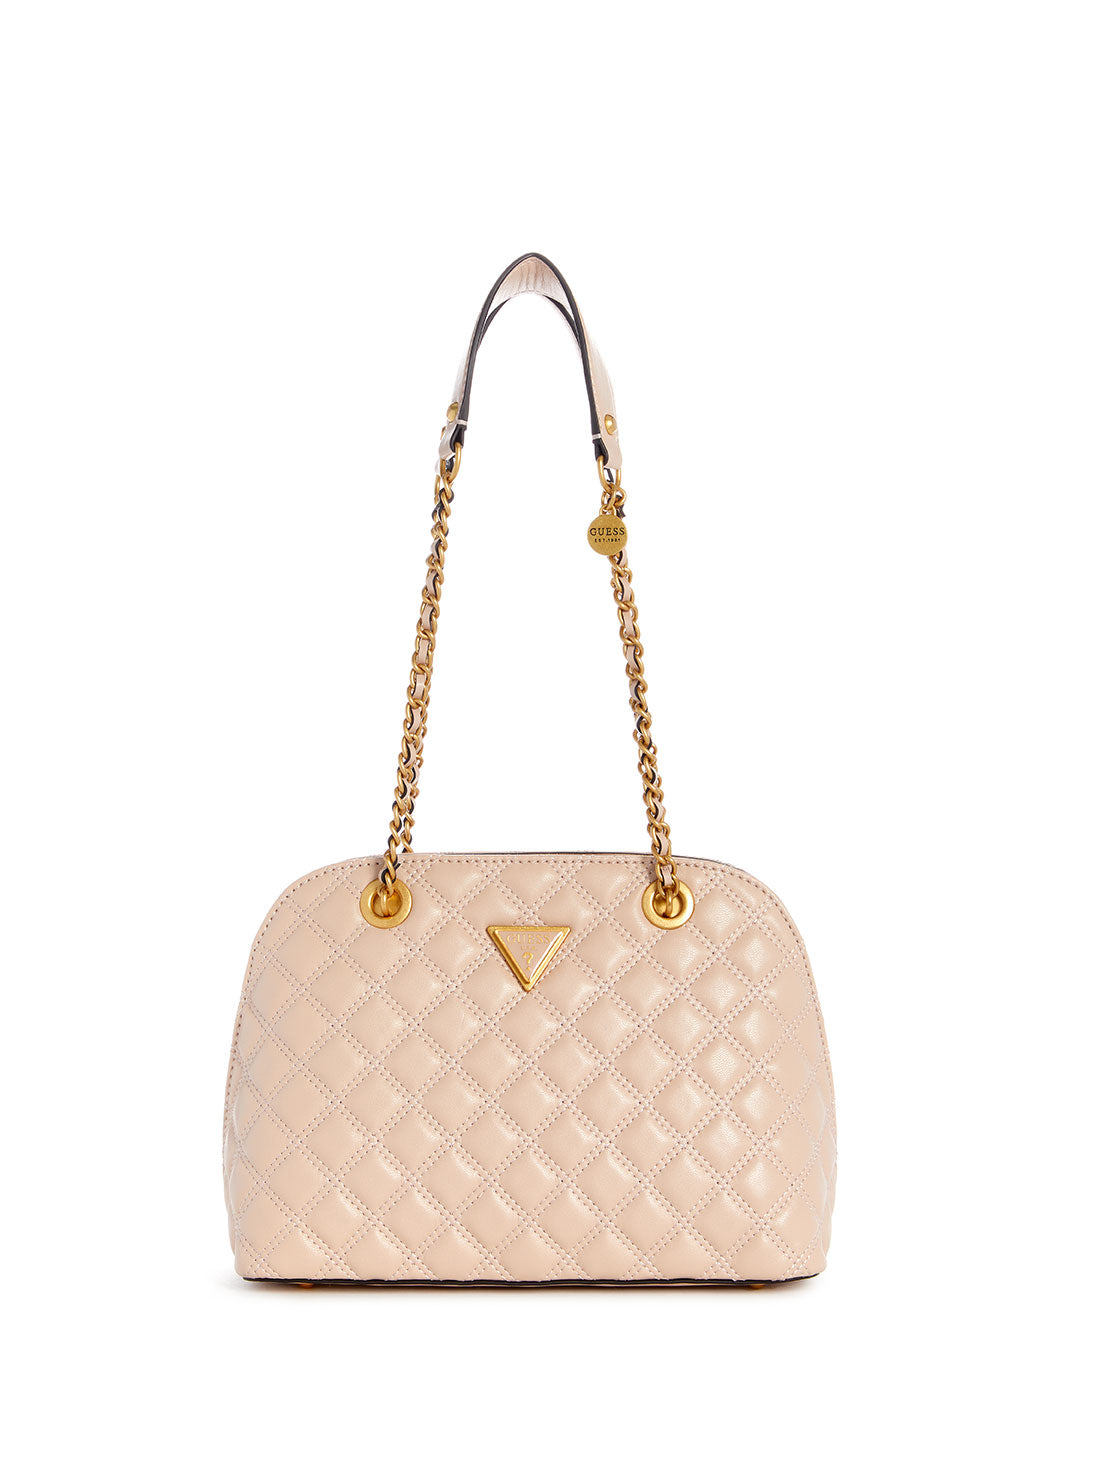 GUESS Light Beige Giully Dome Satchel Bag front view